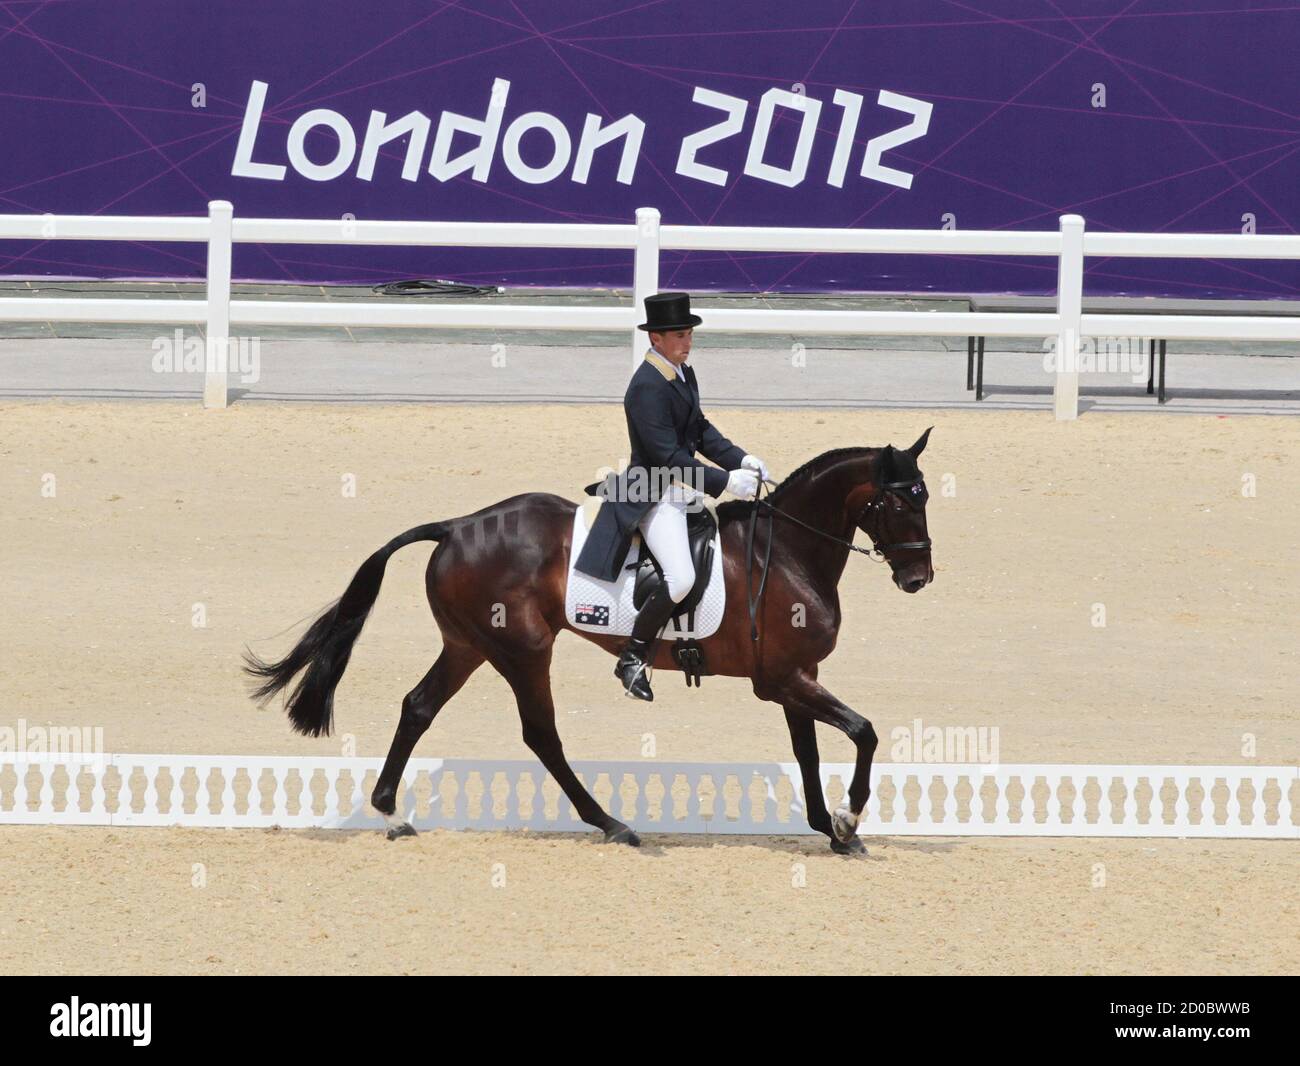 New Zealand rider Sam Griffiths and his horse Happy Times compete in the Eventing Individual Dressage at the Olympic equestrian arena in Greenwich Park during the London 2012 Olympic Games July 28, 2012. REUTERS/Olivia Harris (BRITAIN - Tags: SPORT EQUESTRIANISM OLYMPICS) Stock Photo